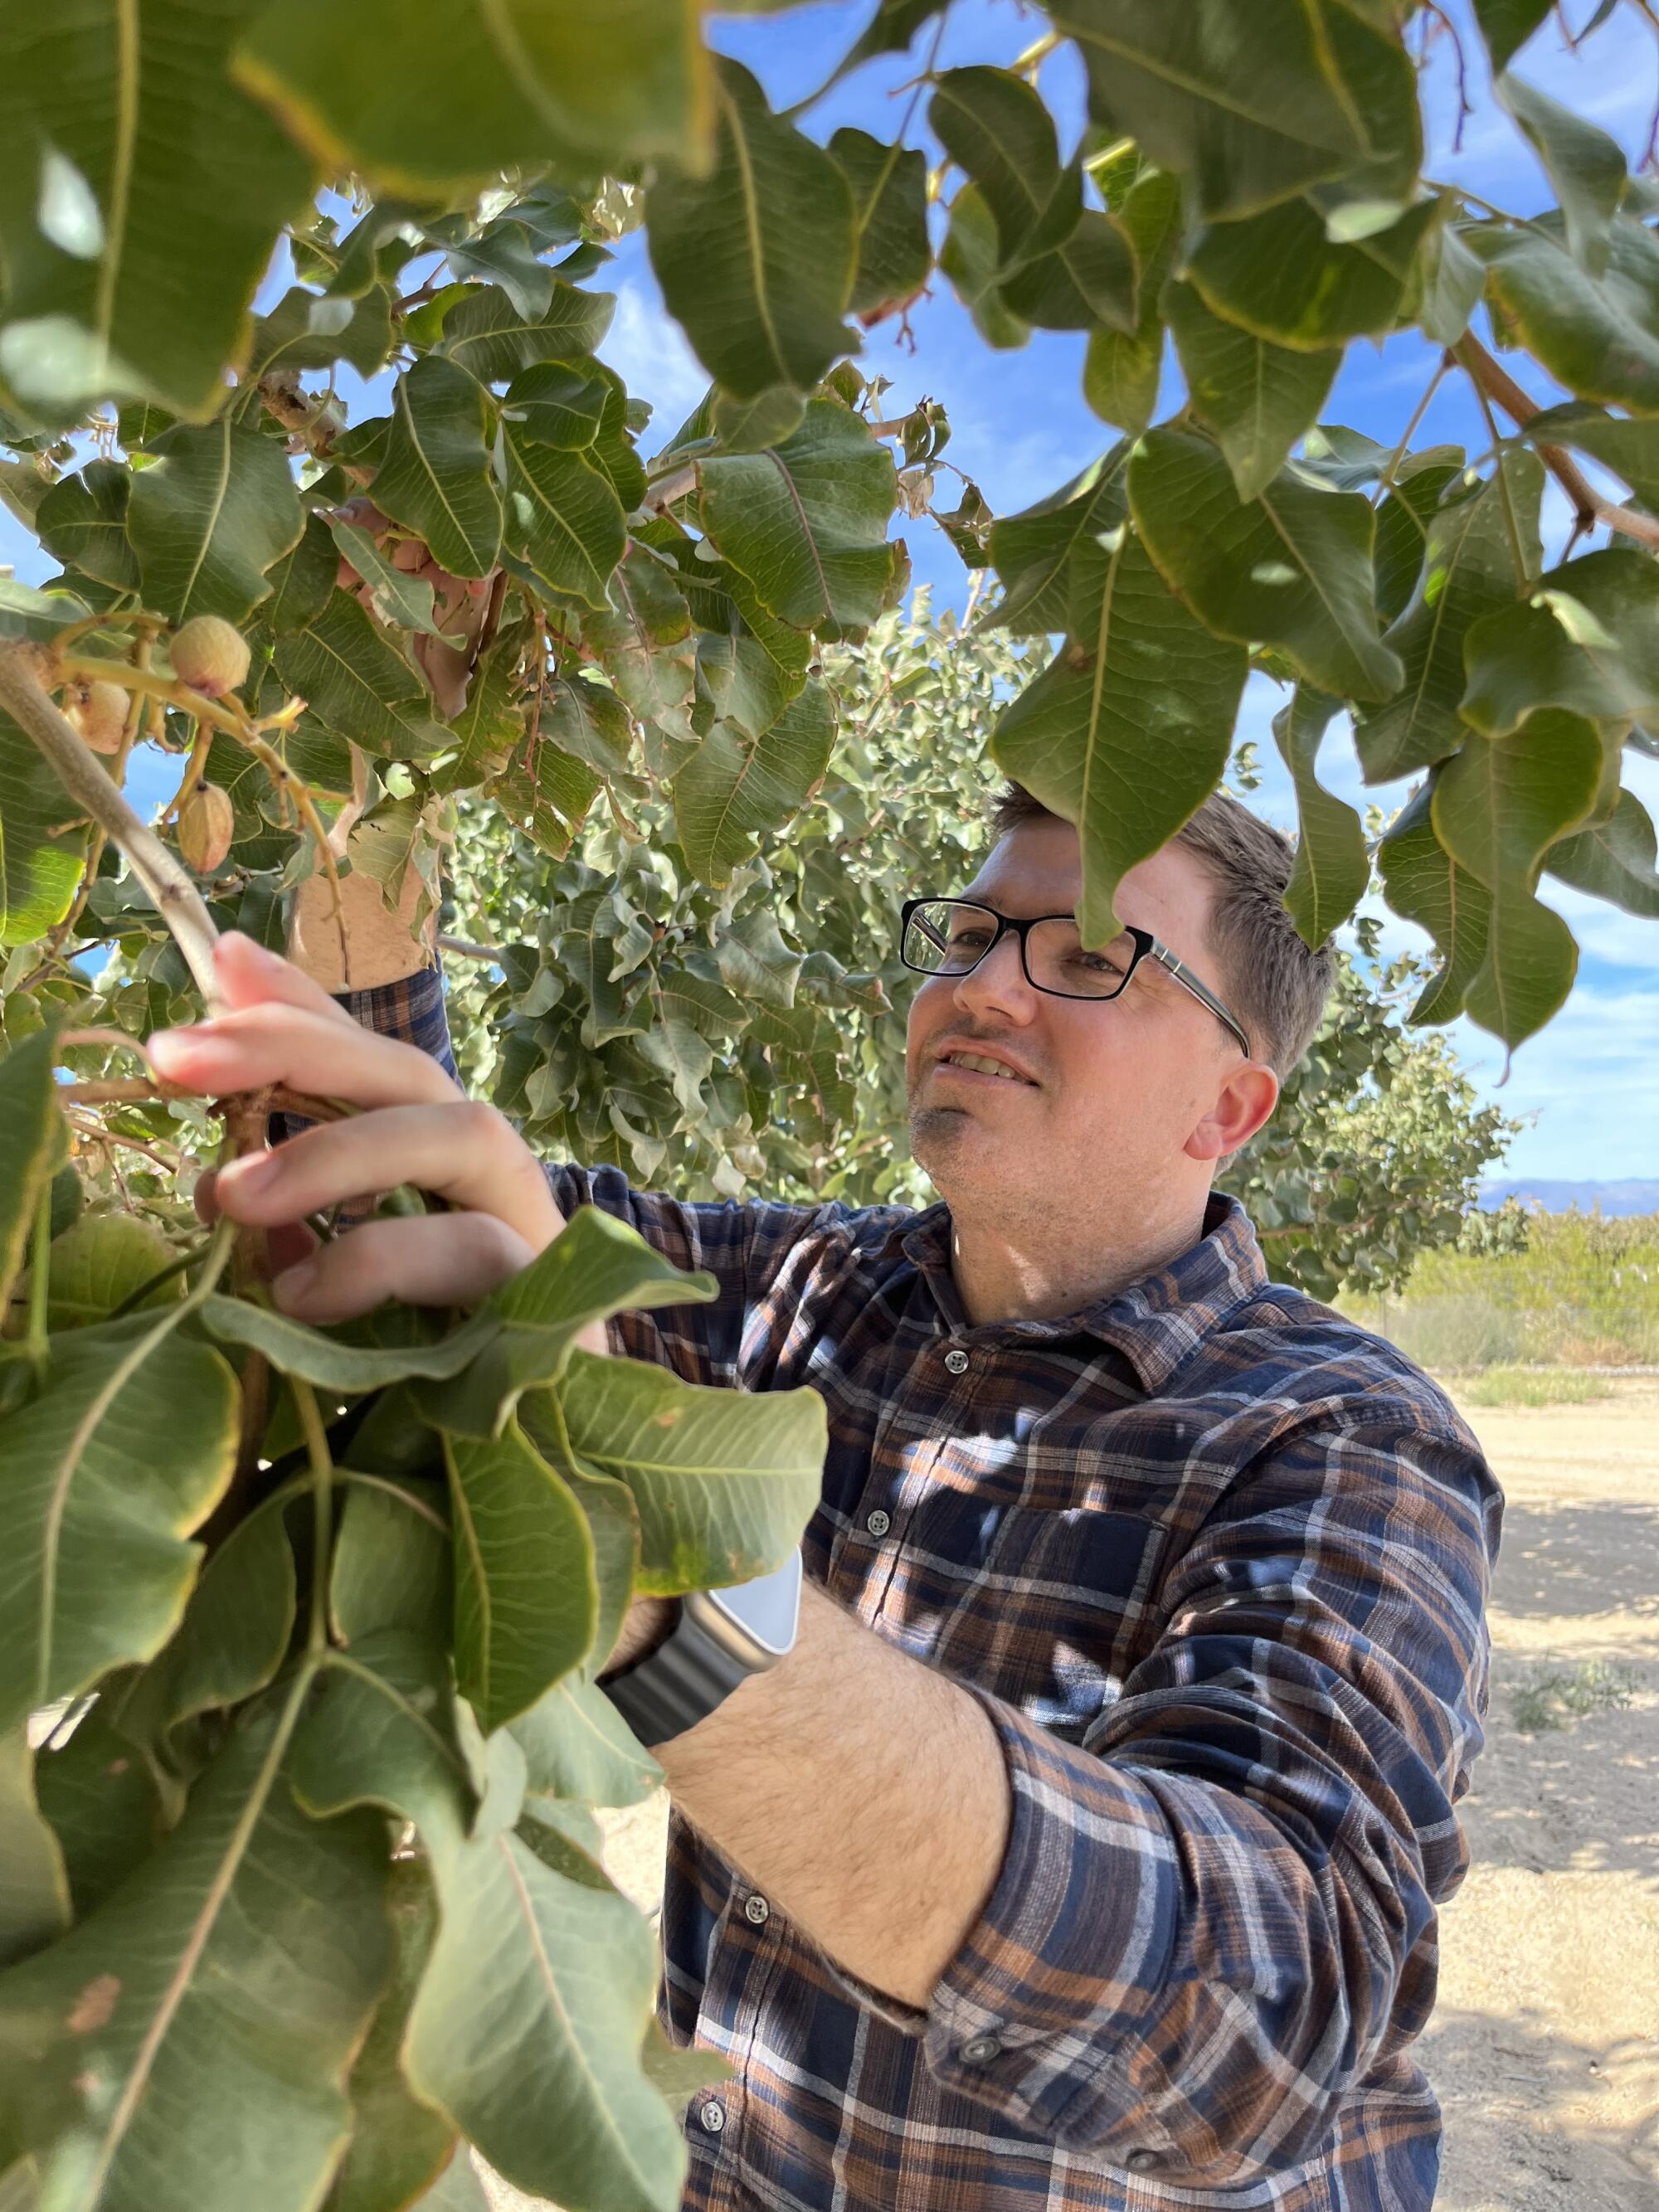 Joshua Nugent inspects some of the 210,000 pistachio trees his agricultural company has planted near the city of Ridgecrest.